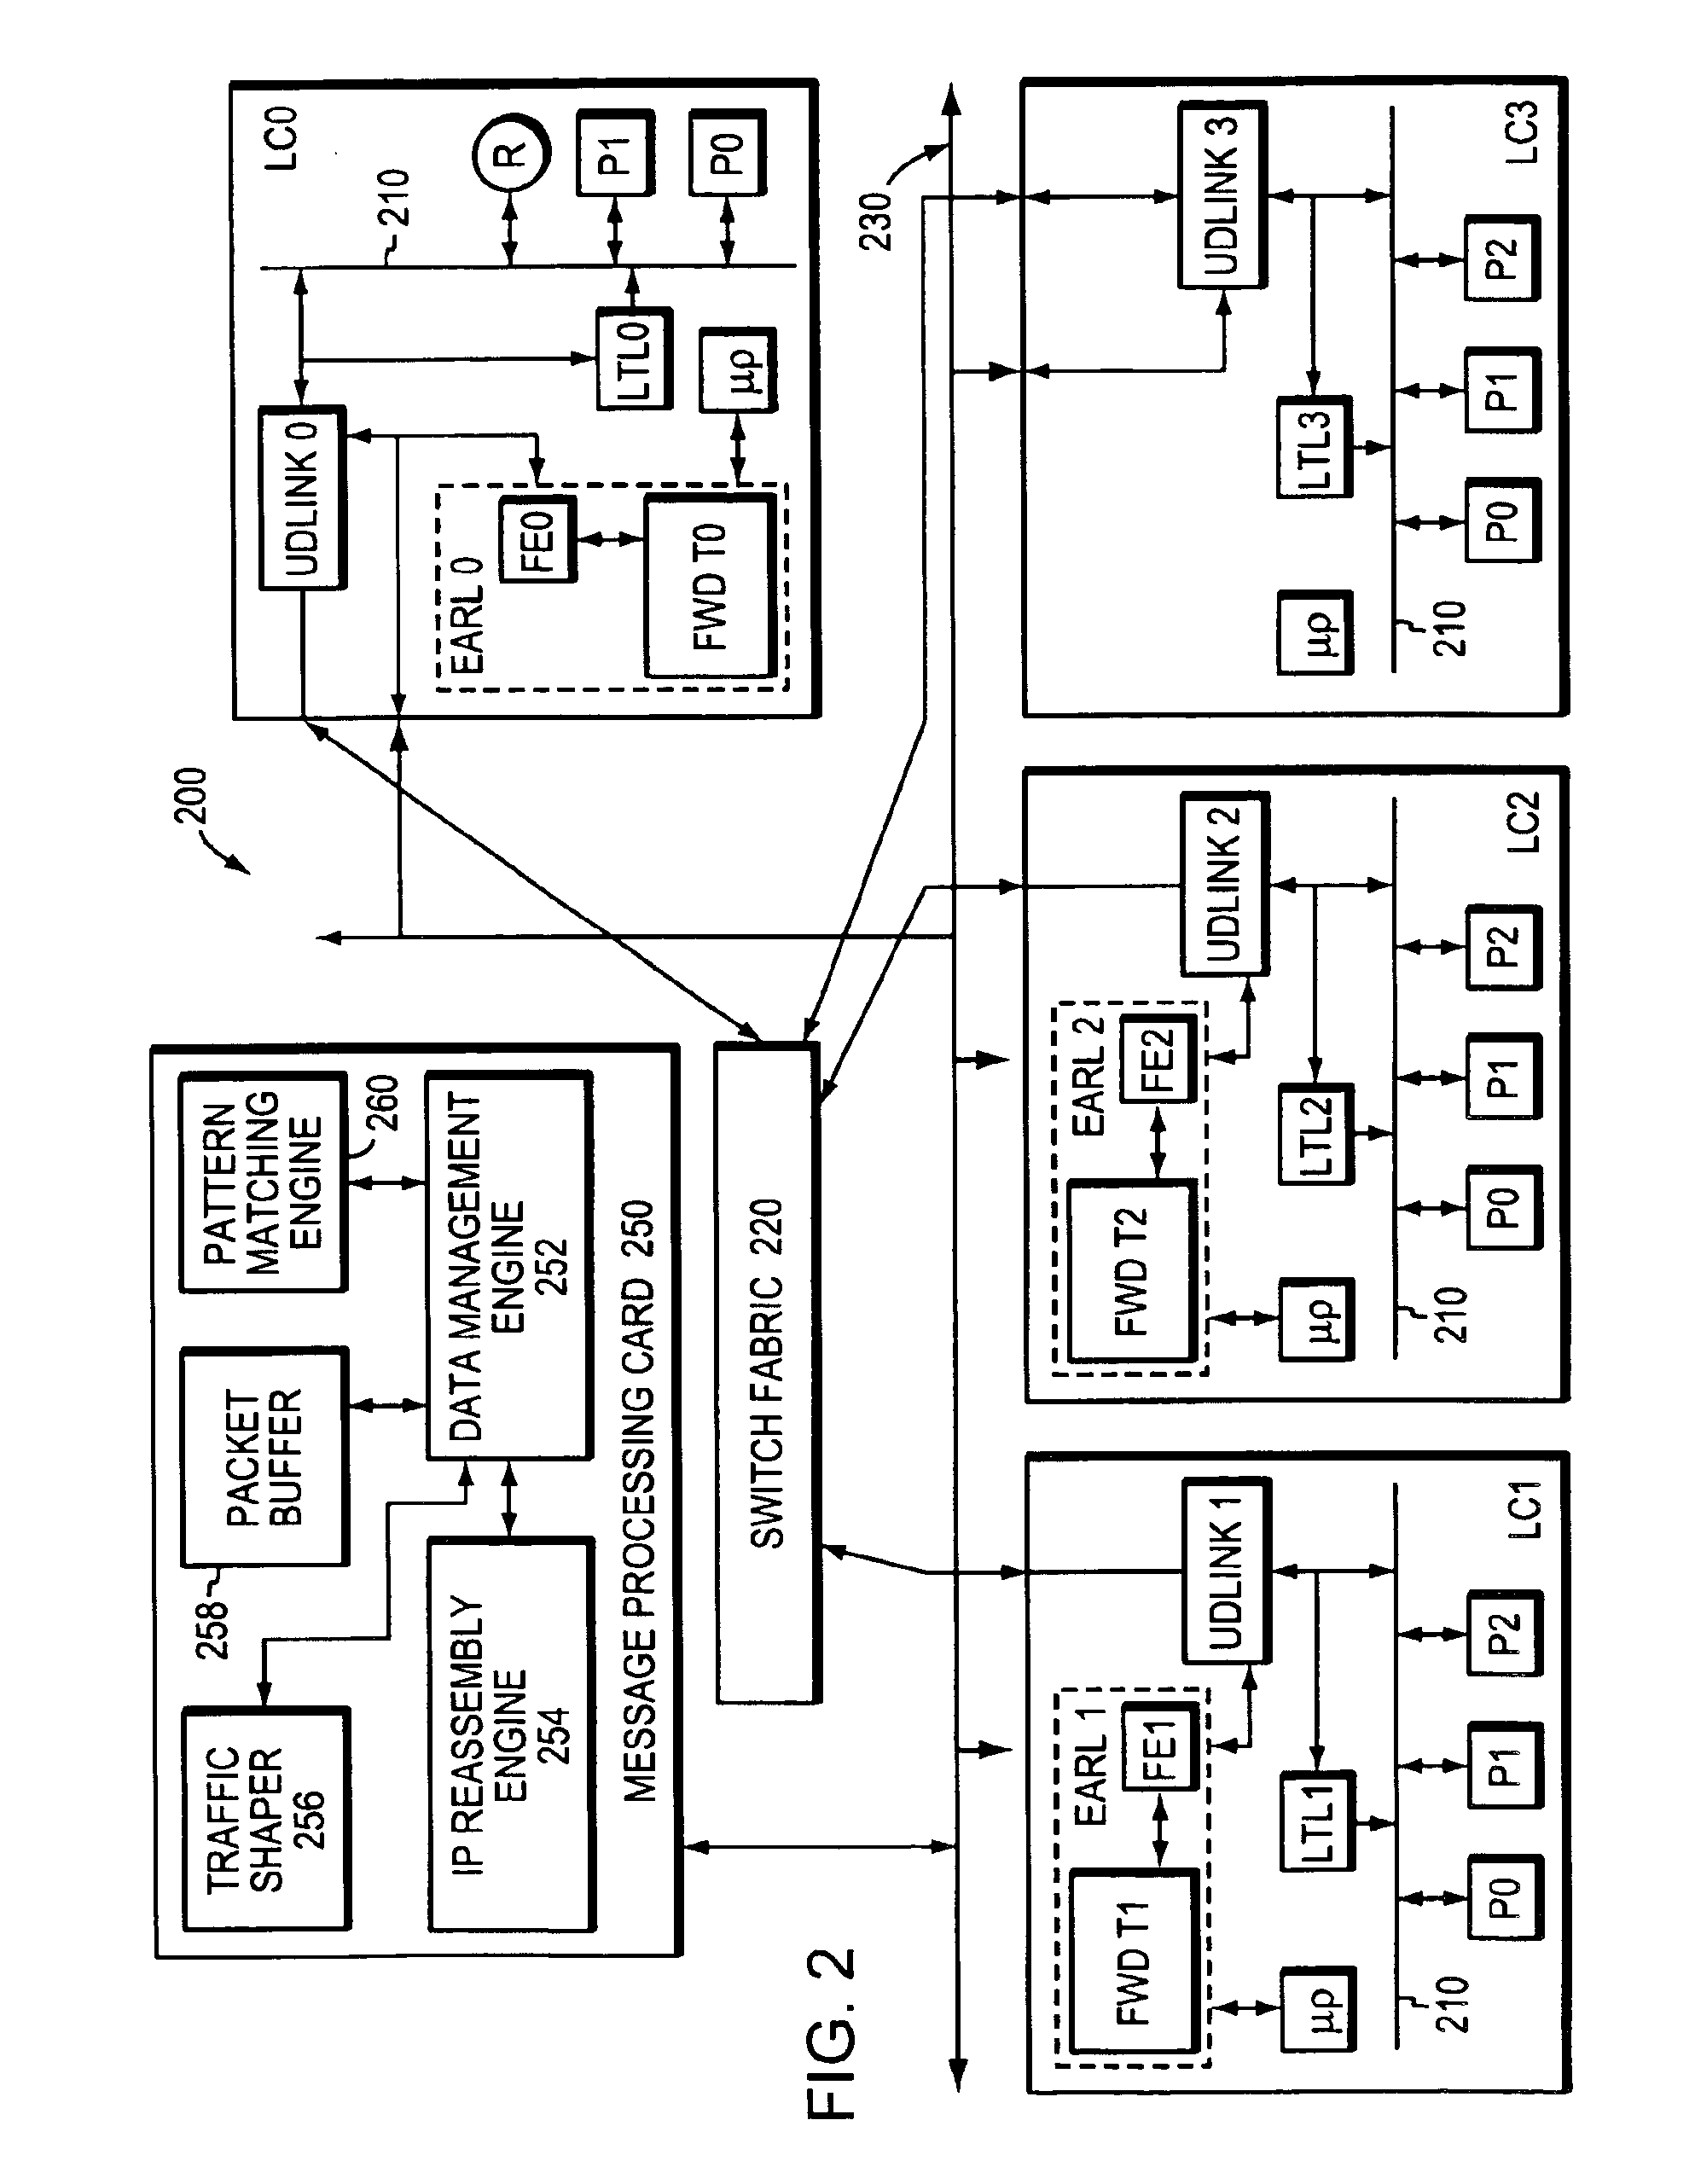 Method and apparatus for high-speed parsing of network messages